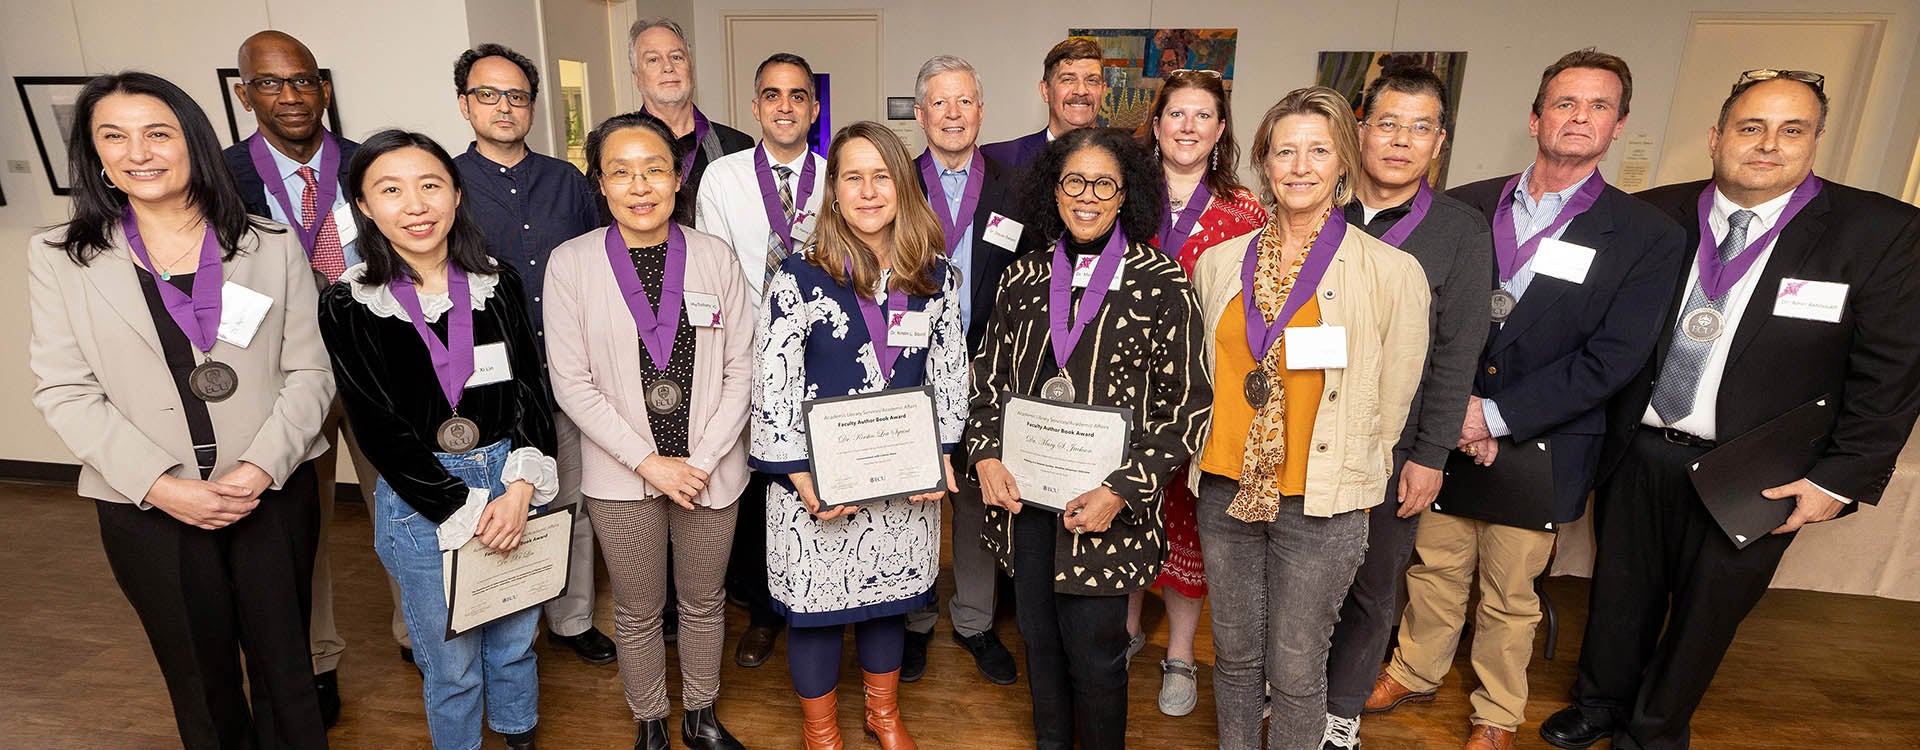 Faculty authors gather after the ECU Main Campus Faculty Author Book and Affordable Textbooks Awards at the Janice Hardison Faulkner Gallery. 